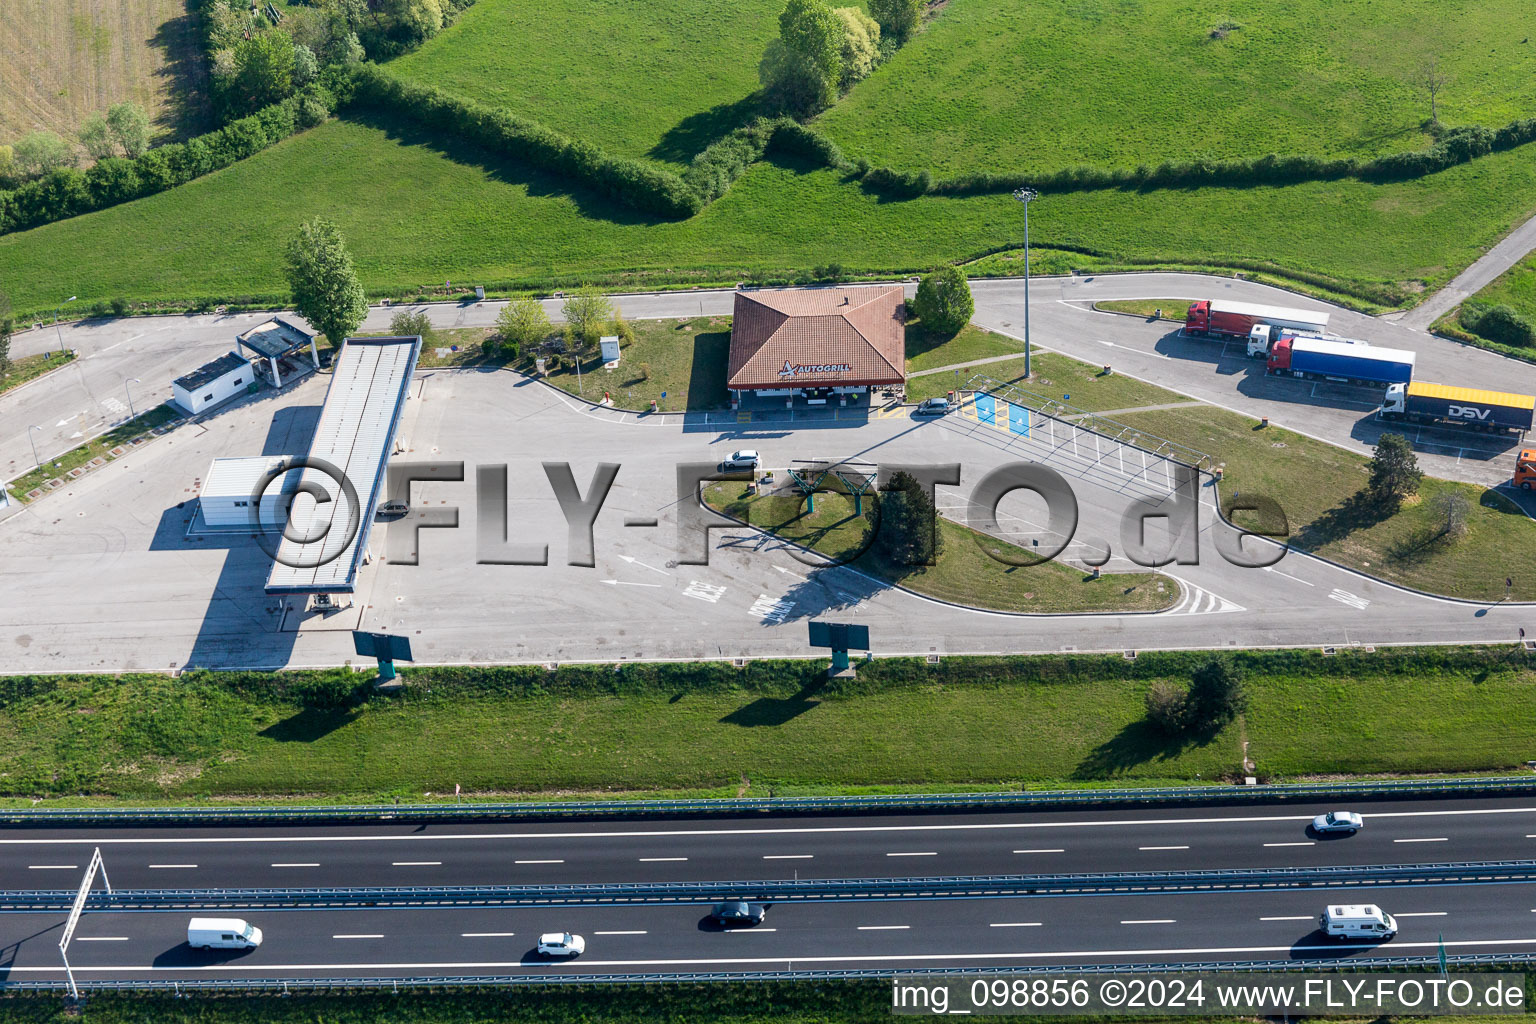 Motorway service area Autogrill Gruaro Ovest on the edge of the course of highway A21 in La Sega, Gruaro in Venetien, Italy